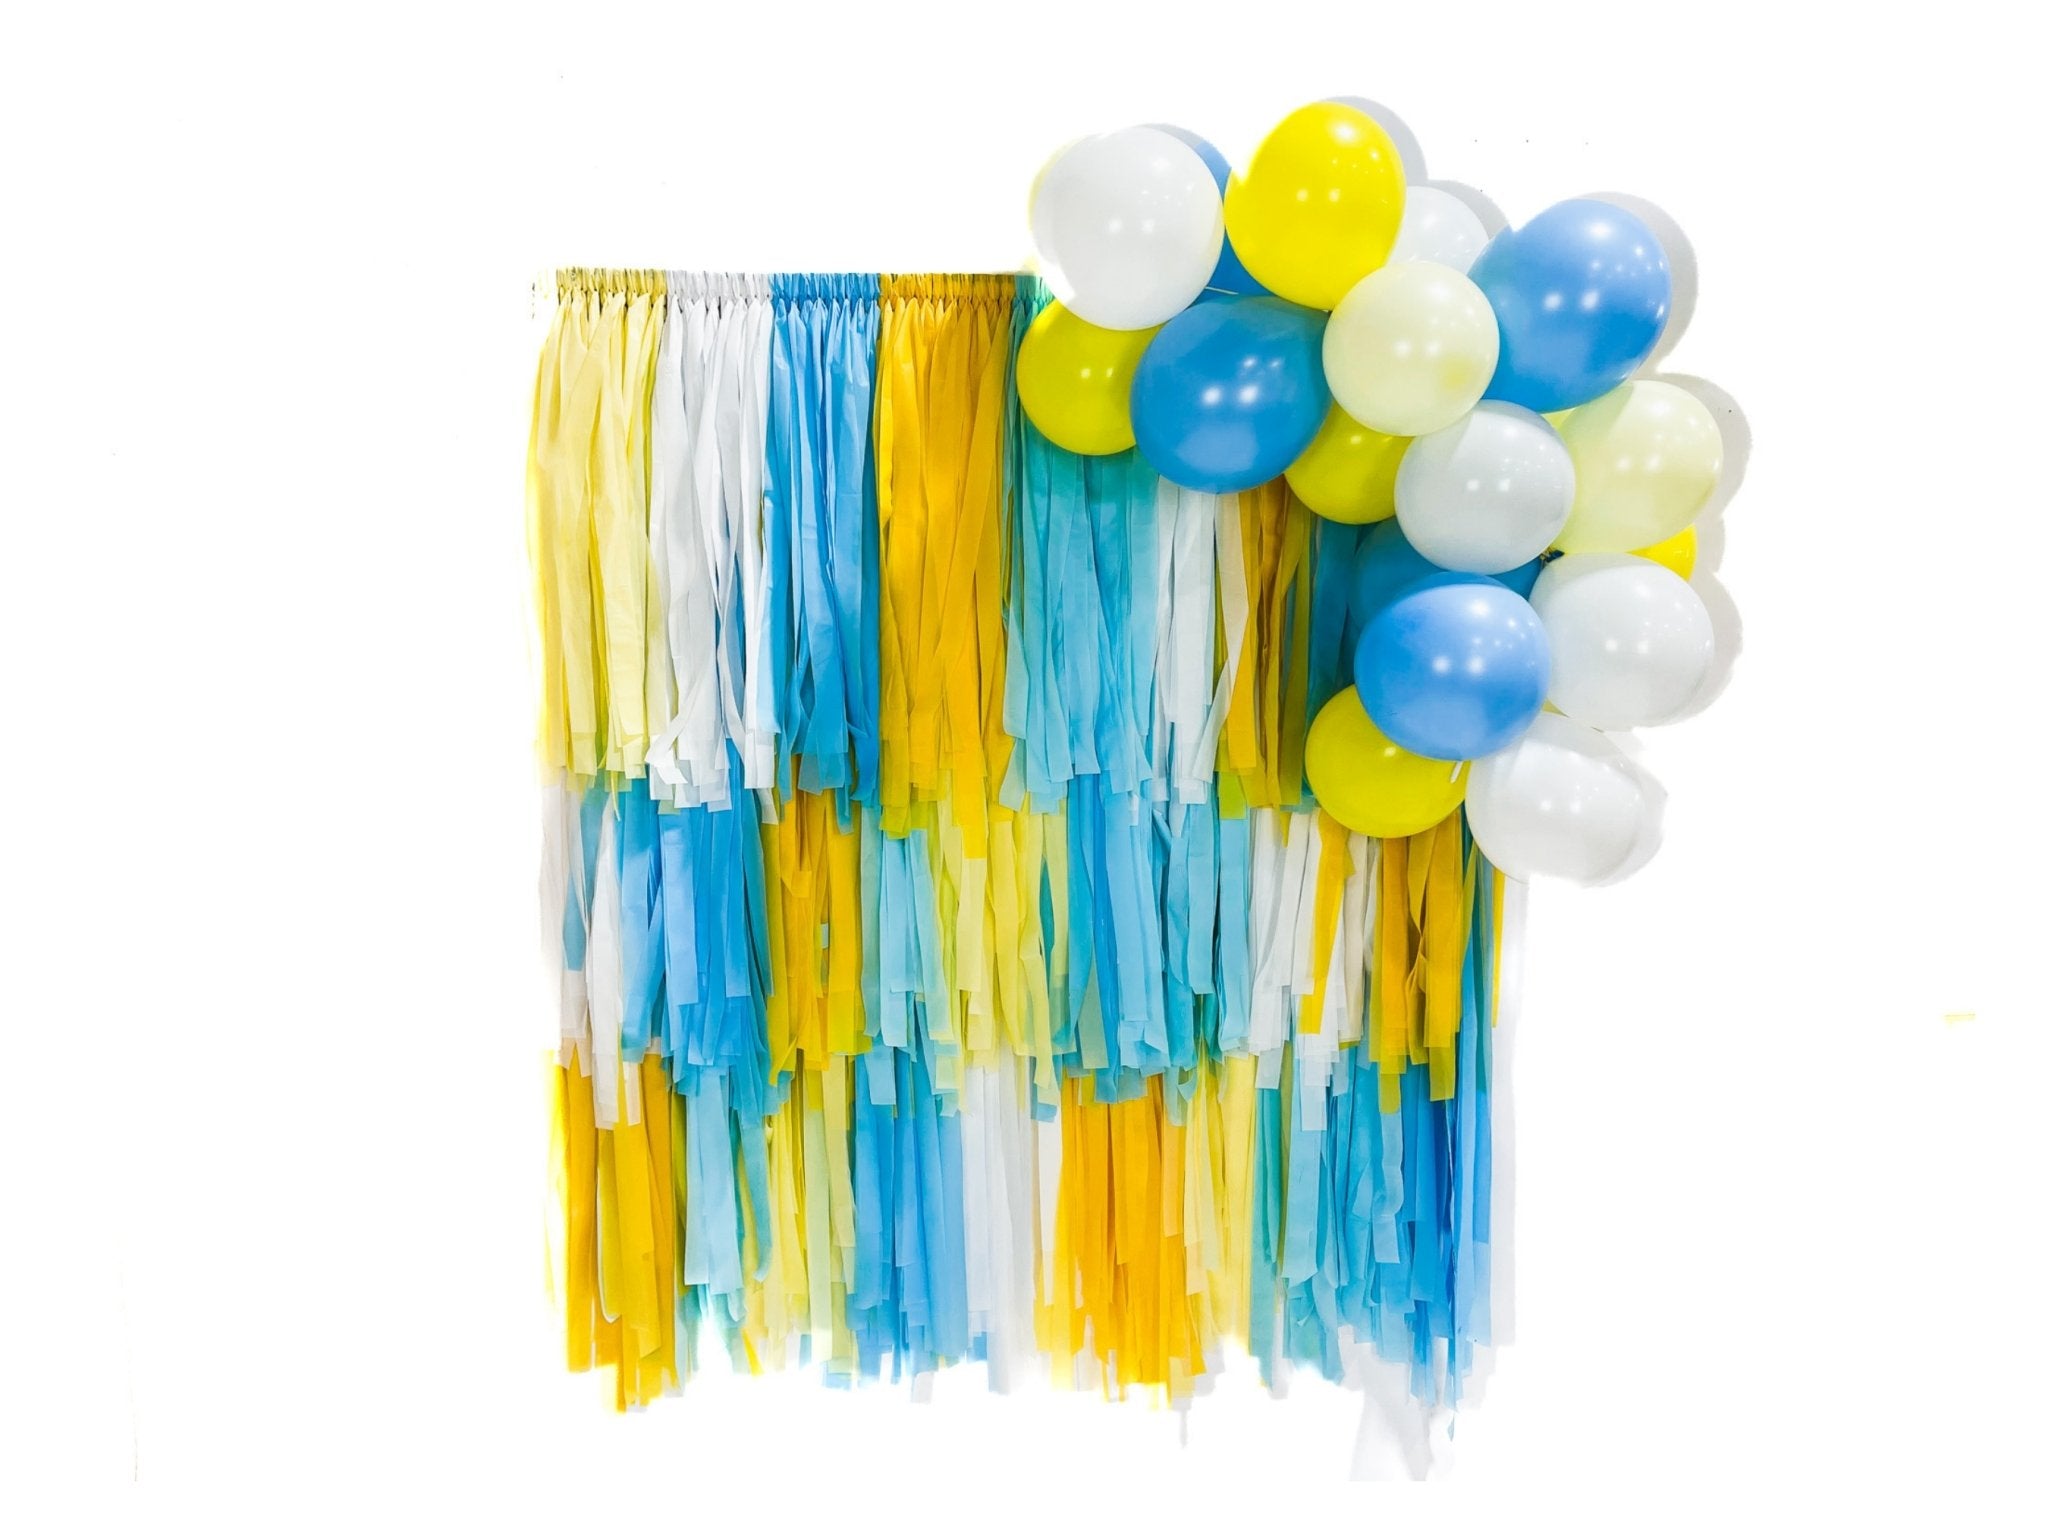 Rubber Ducky Backdrop - Oh My Darling Party Co-baby showerBLUE BACKDROPBLUE BACKDROPS #Fringe_Backdrop#